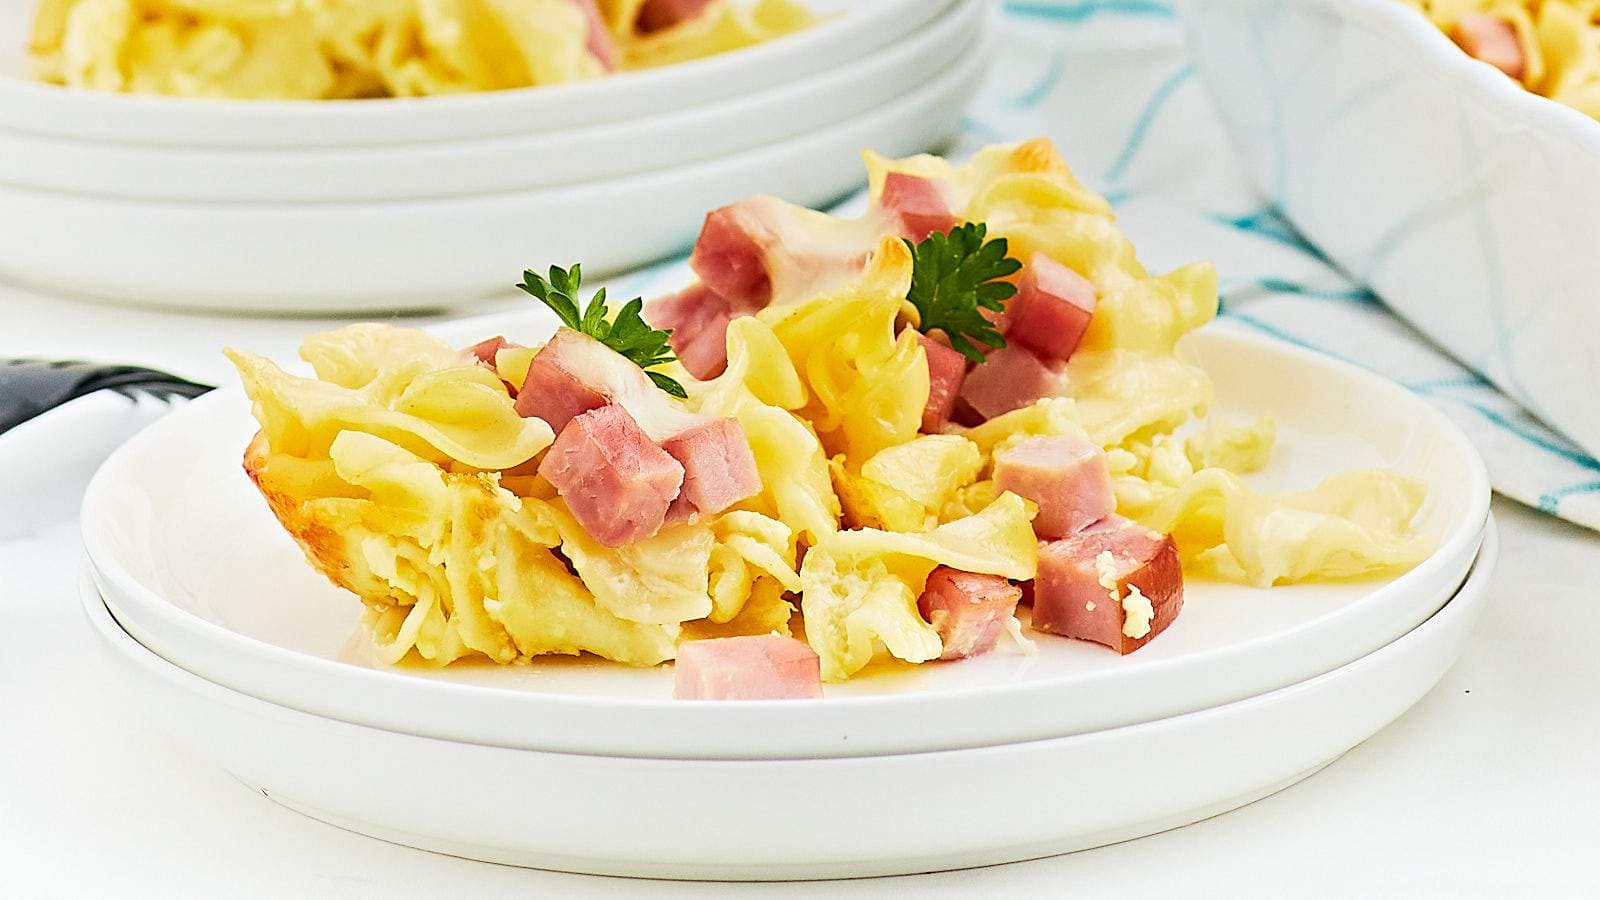 <p>Our family loves this quick, easy, hearty Ham and Noodle Casserole (German: Nudelauflauf mit Schincken). Tender pasta is topped with a simple egg and cream sauce and finished with Swiss cheese.</p><p><strong>Get the Recipe: <a href="https://cheerfulcook.com/german-ham-and-noodle-casserole/" rel="noreferrer noopener">Ham And Noodle Casserole</a></strong></p>